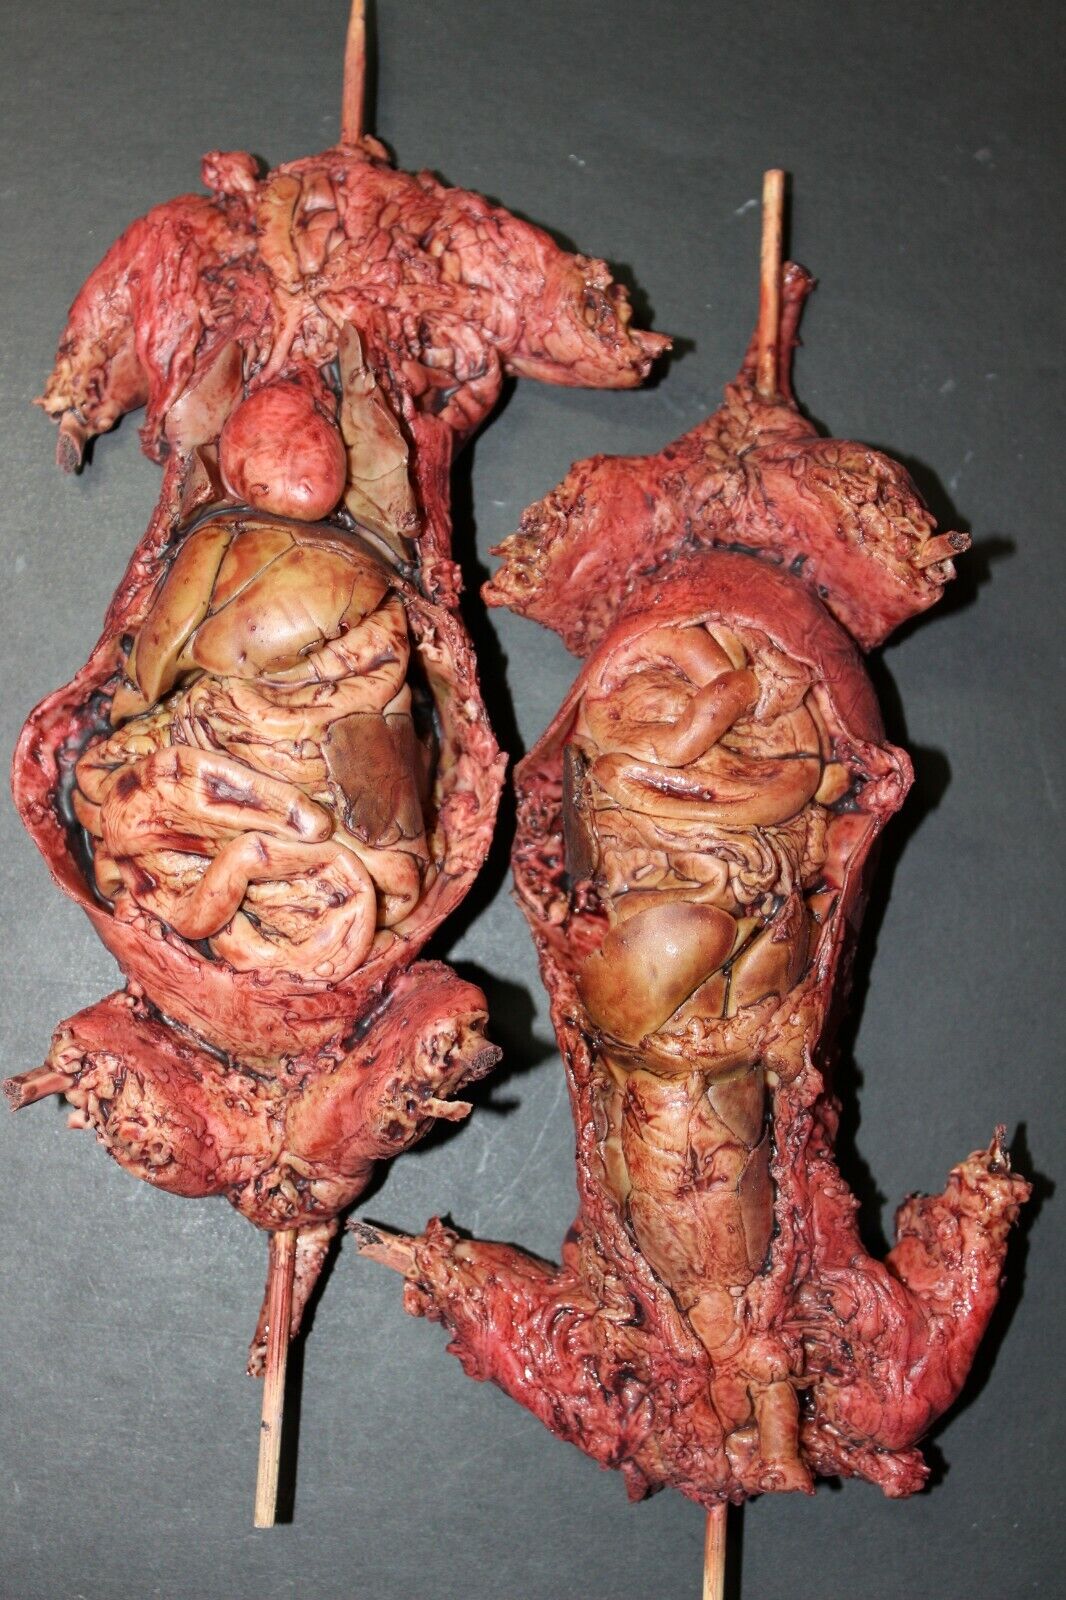 CREEPY CUISINE TWO ROAD-KILLED AND SKEWERED VERMIN HORROR HALLOWEEN PROPS